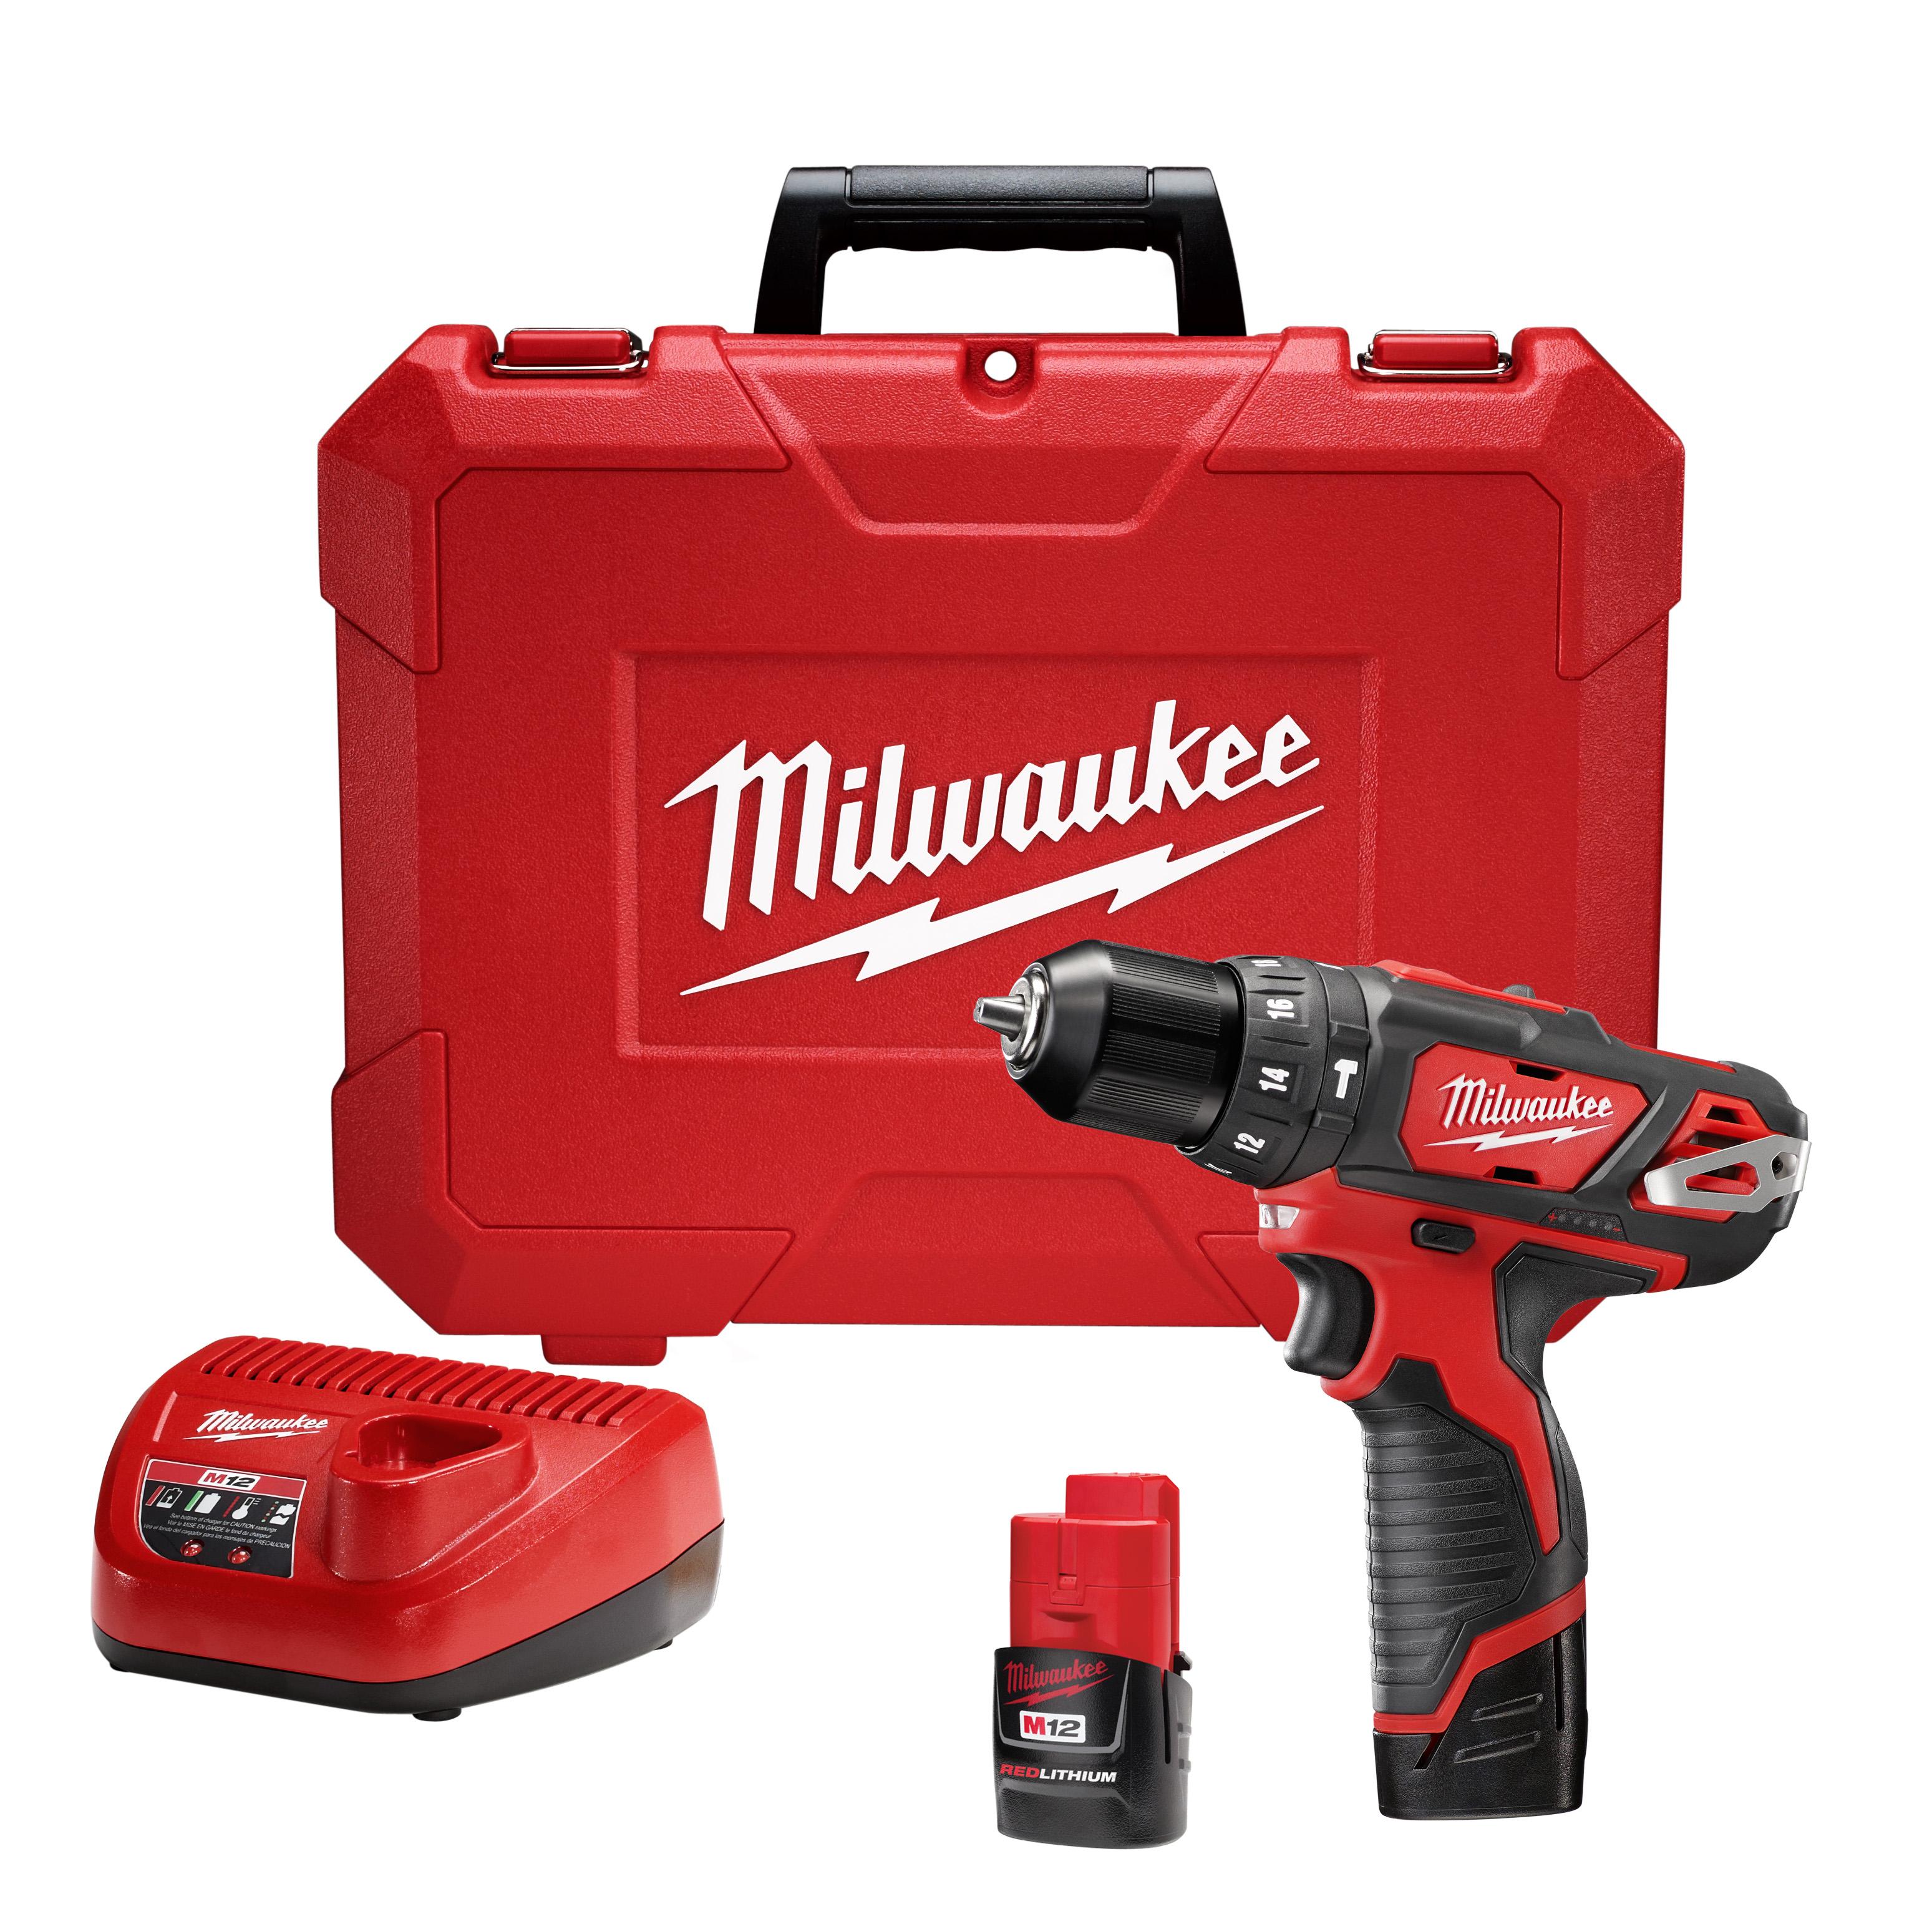 Milwaukee® M12™ 2407-22 Compact Lightweight Cordless Drill/Driver Kit, 3/8 in Chuck, 12 VDC, 0 to 400/0 to 1500 rpm No-Load, 7-3/8 in OAL, Lithium-Ion Battery